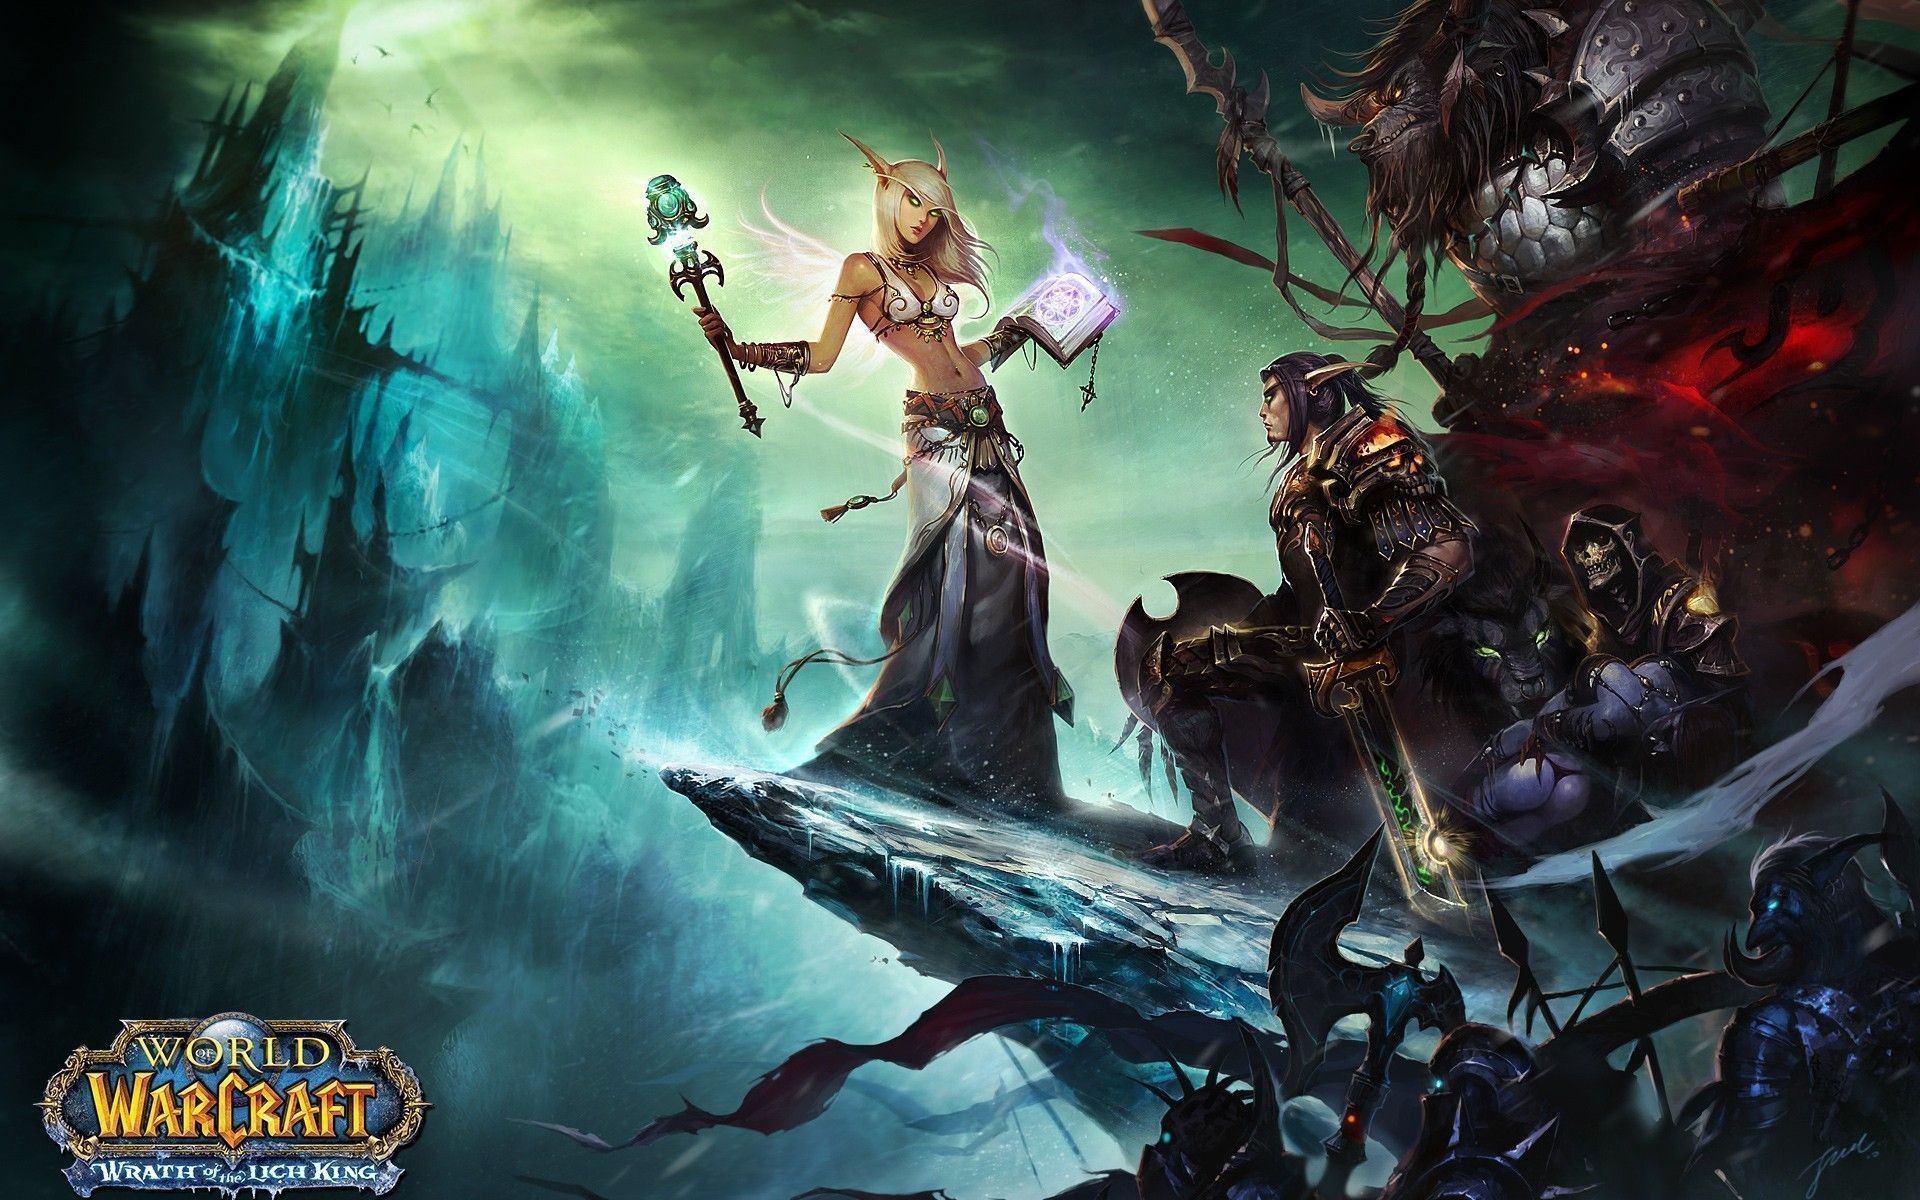 1920x1200 World of Warcraft Wallpaper Backgrounds High Definition Wallpapers .